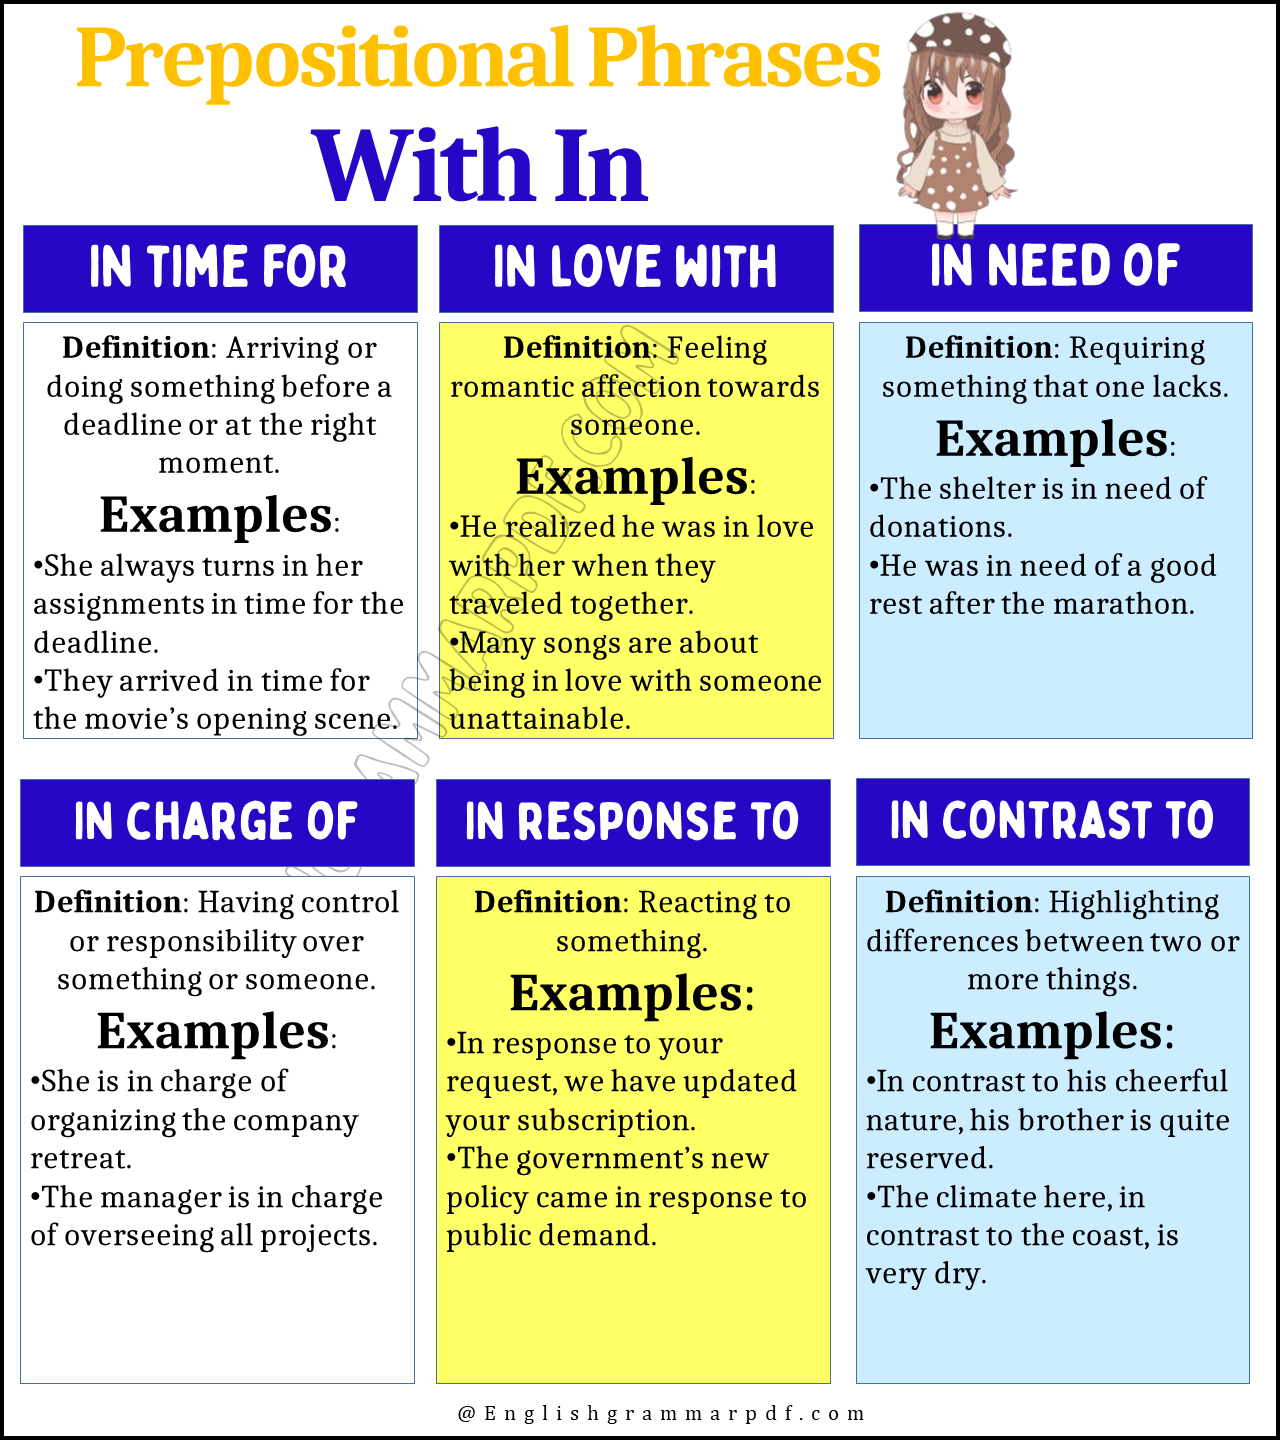 Prepositional Phrases With in